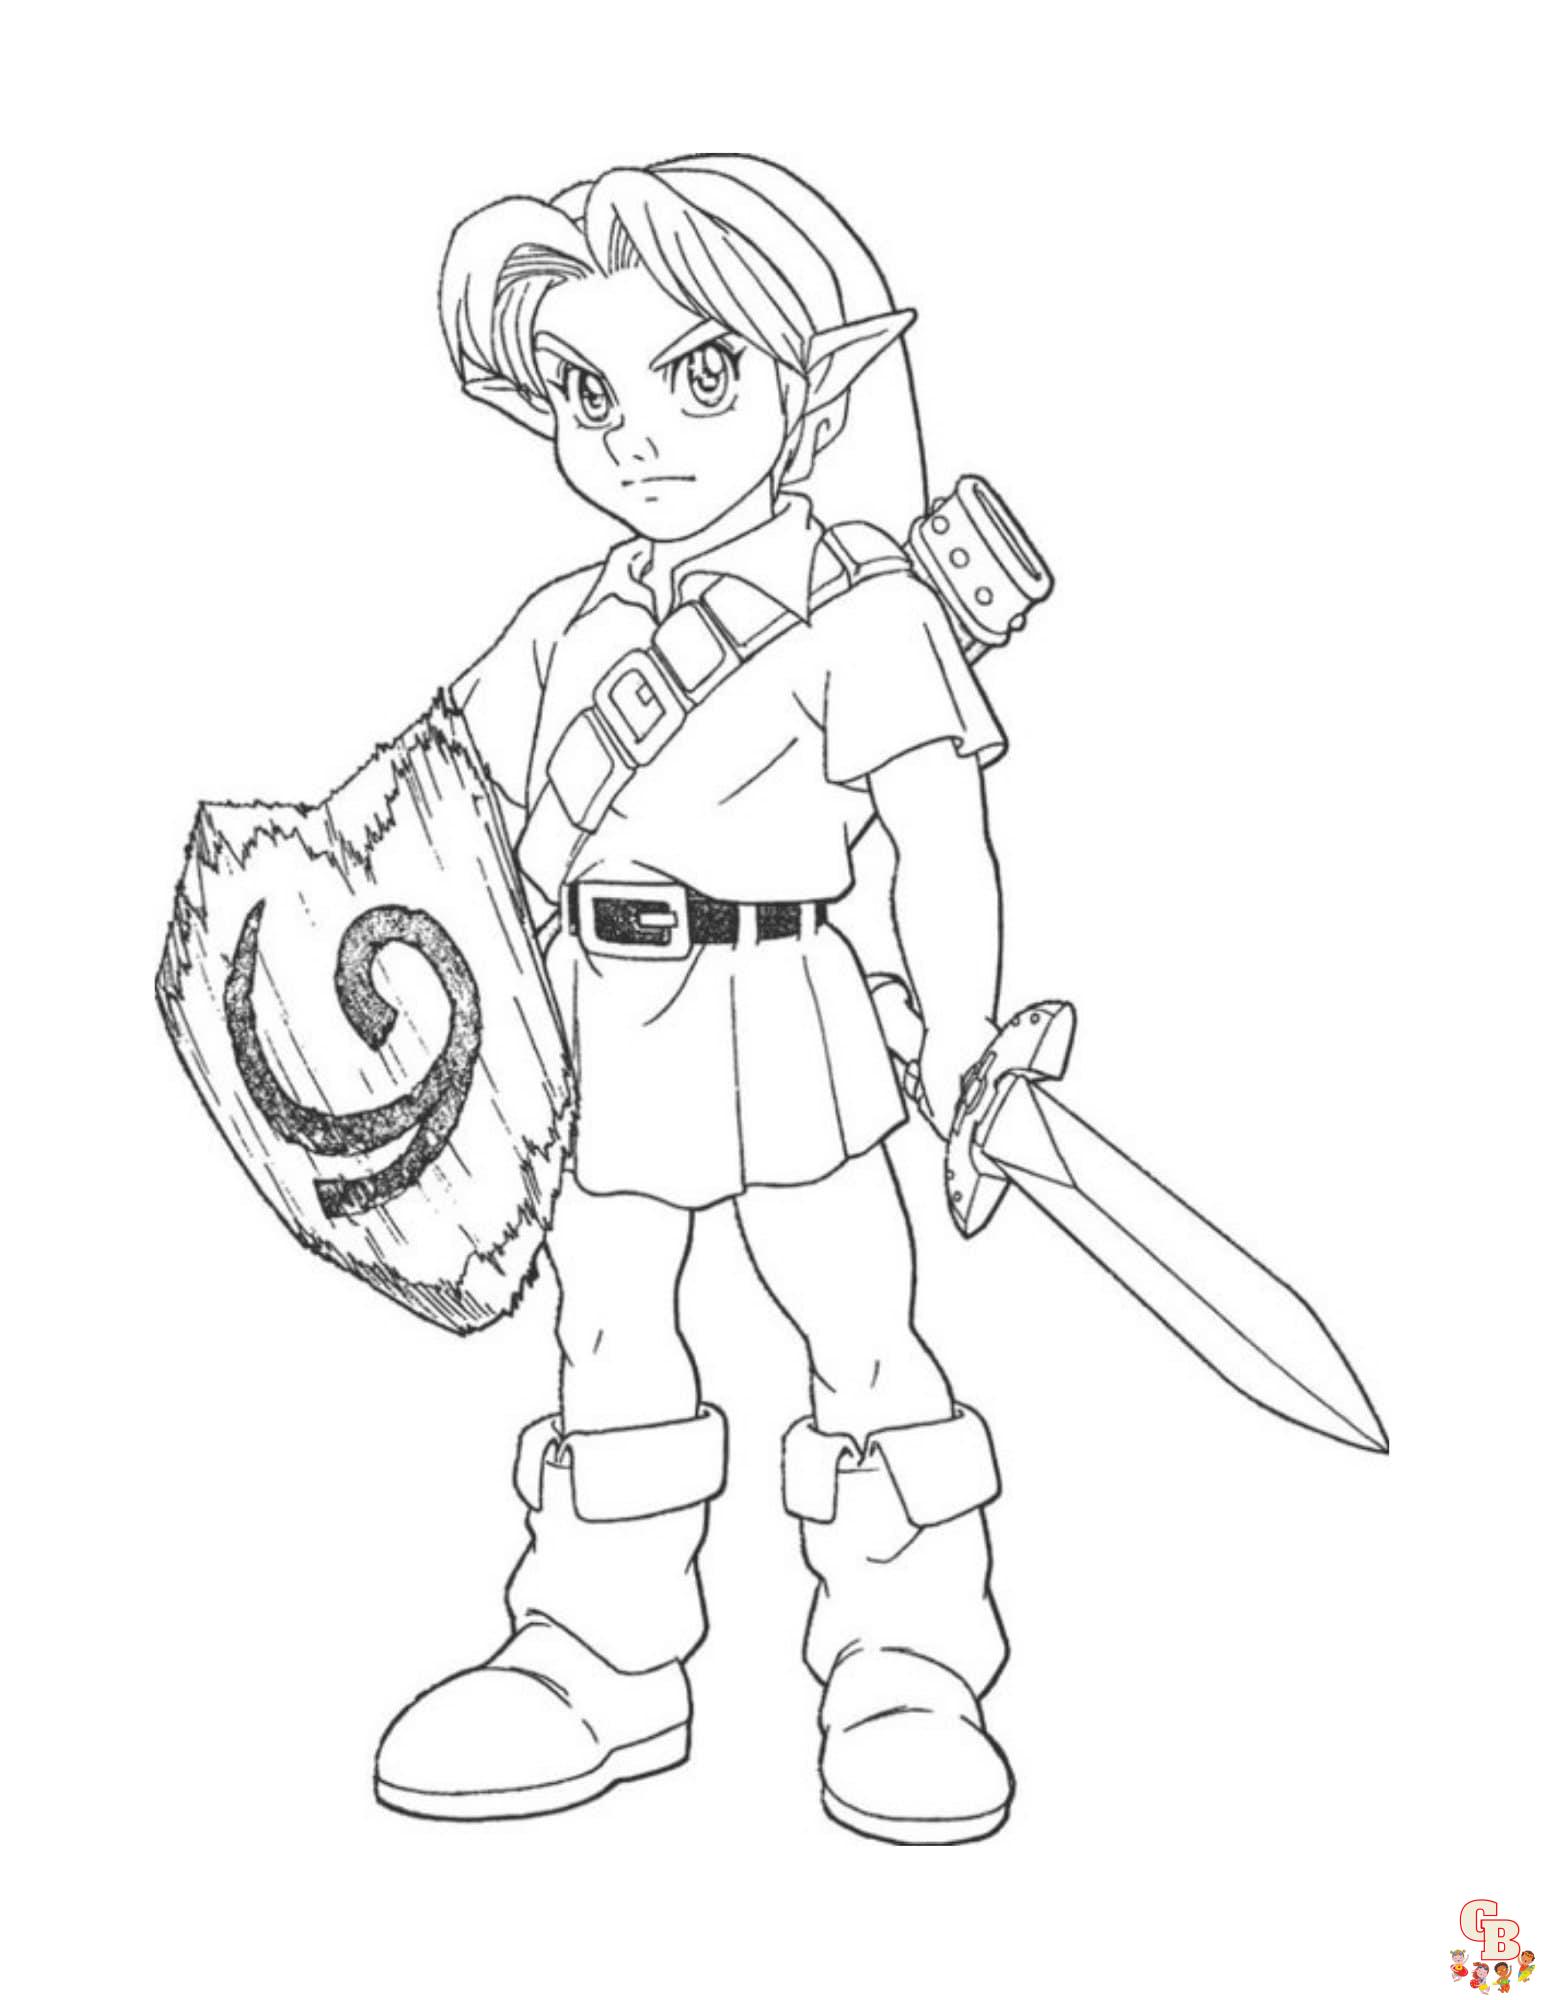 Link Coloring Pages 3